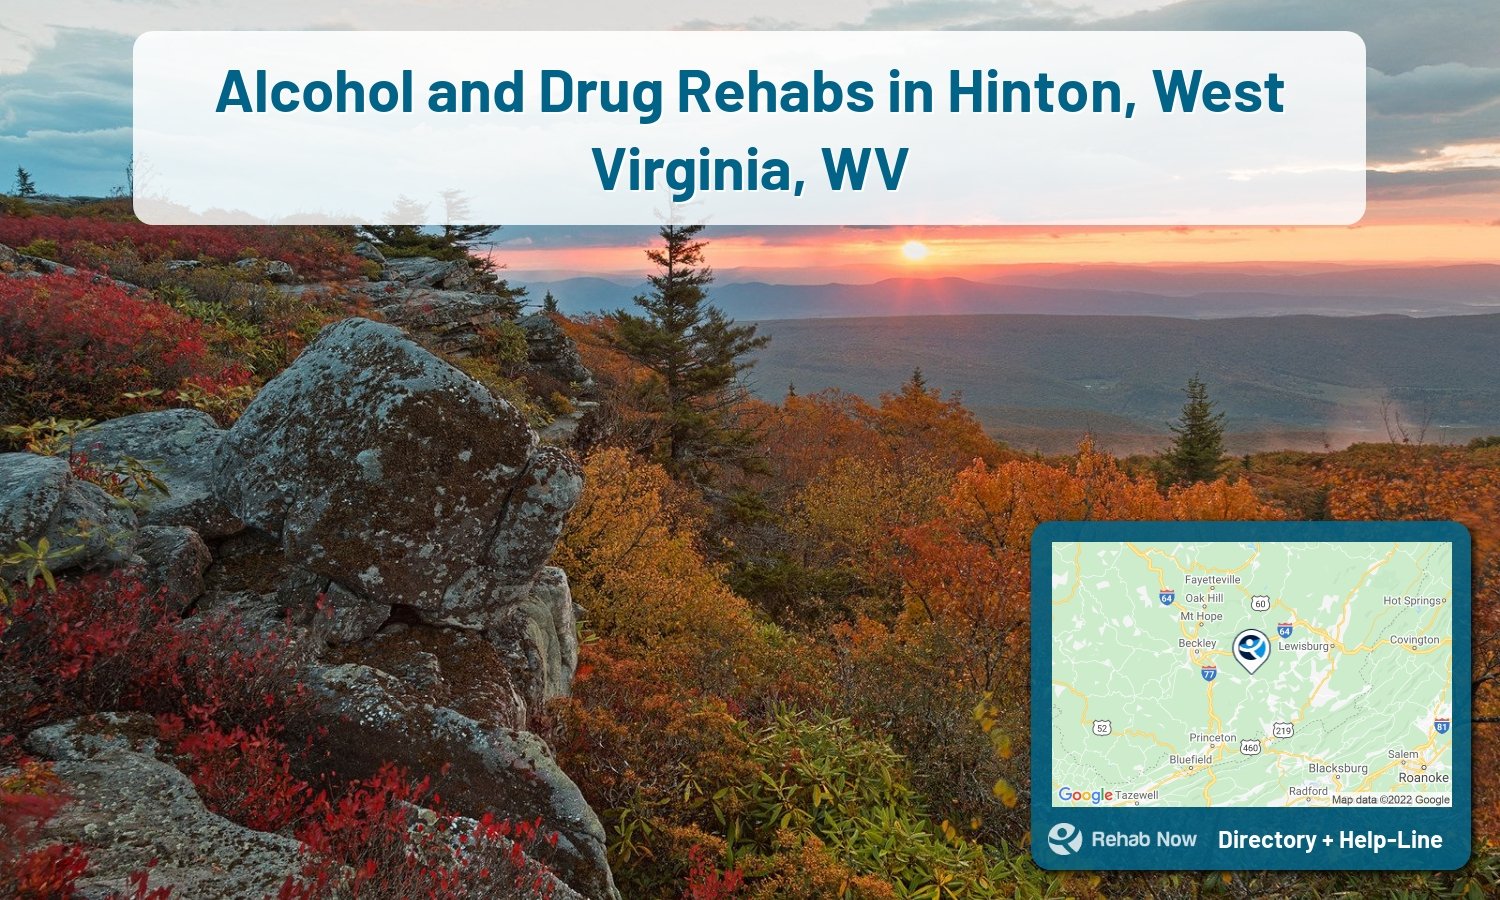 Find drug rehab and alcohol treatment services in Hinton. Our experts help you find a center in Hinton, West Virginia